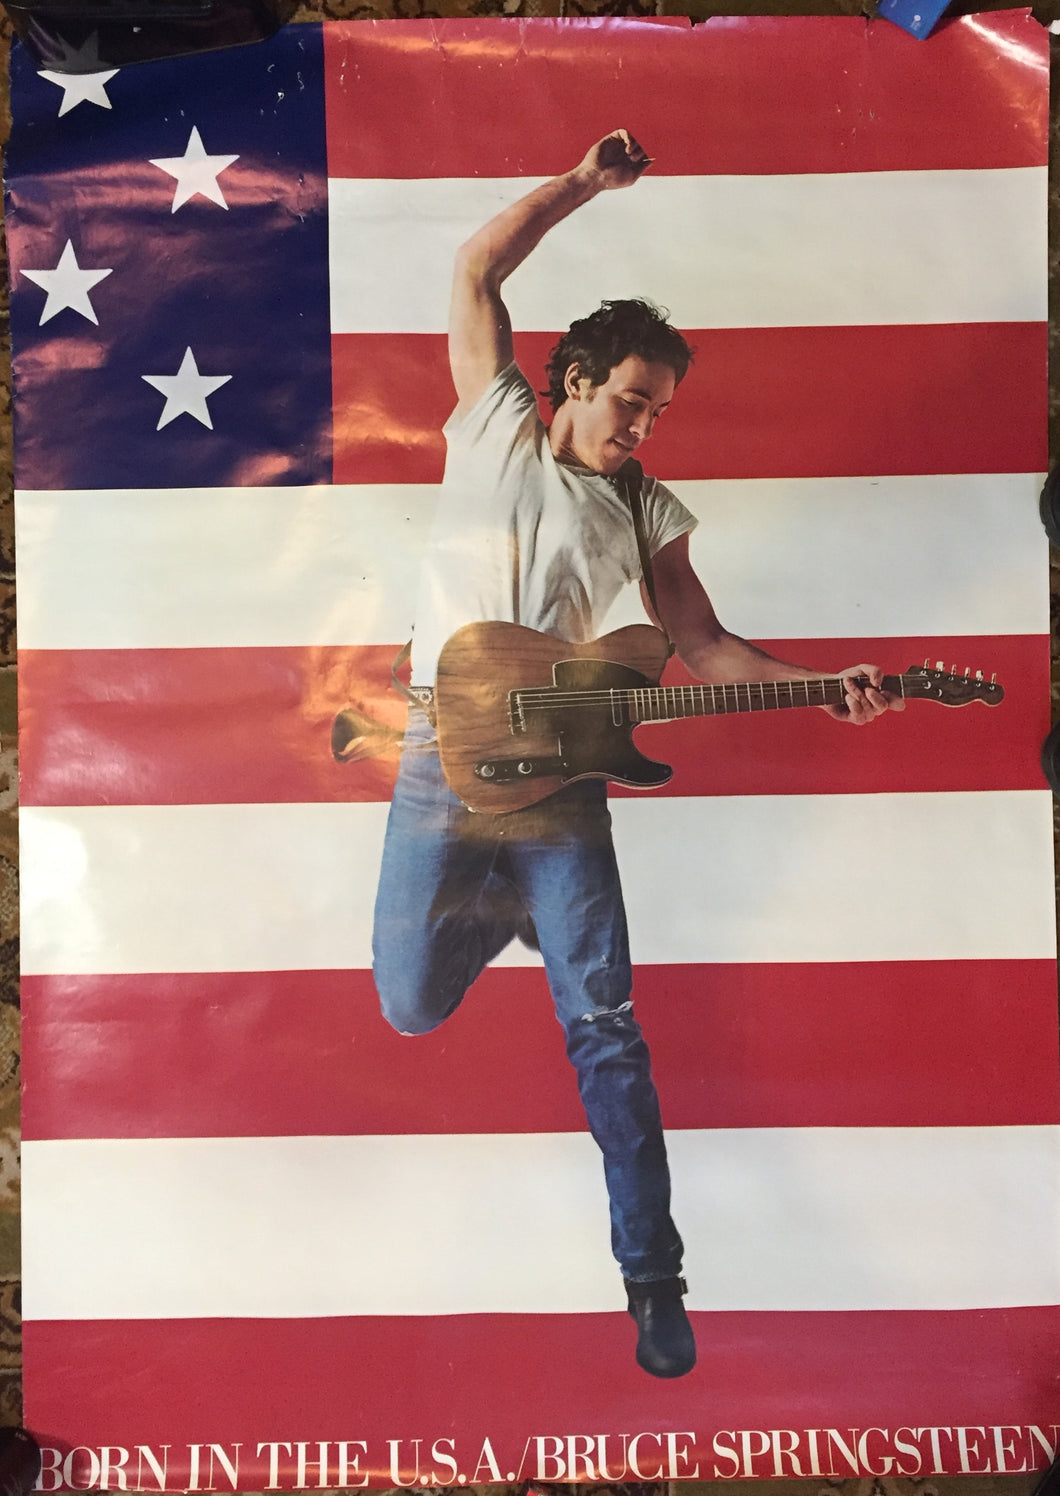 BRUCE SPRINGSTEEN - BORN IN THE U.S.A. (1984 BIG USED) POSTER